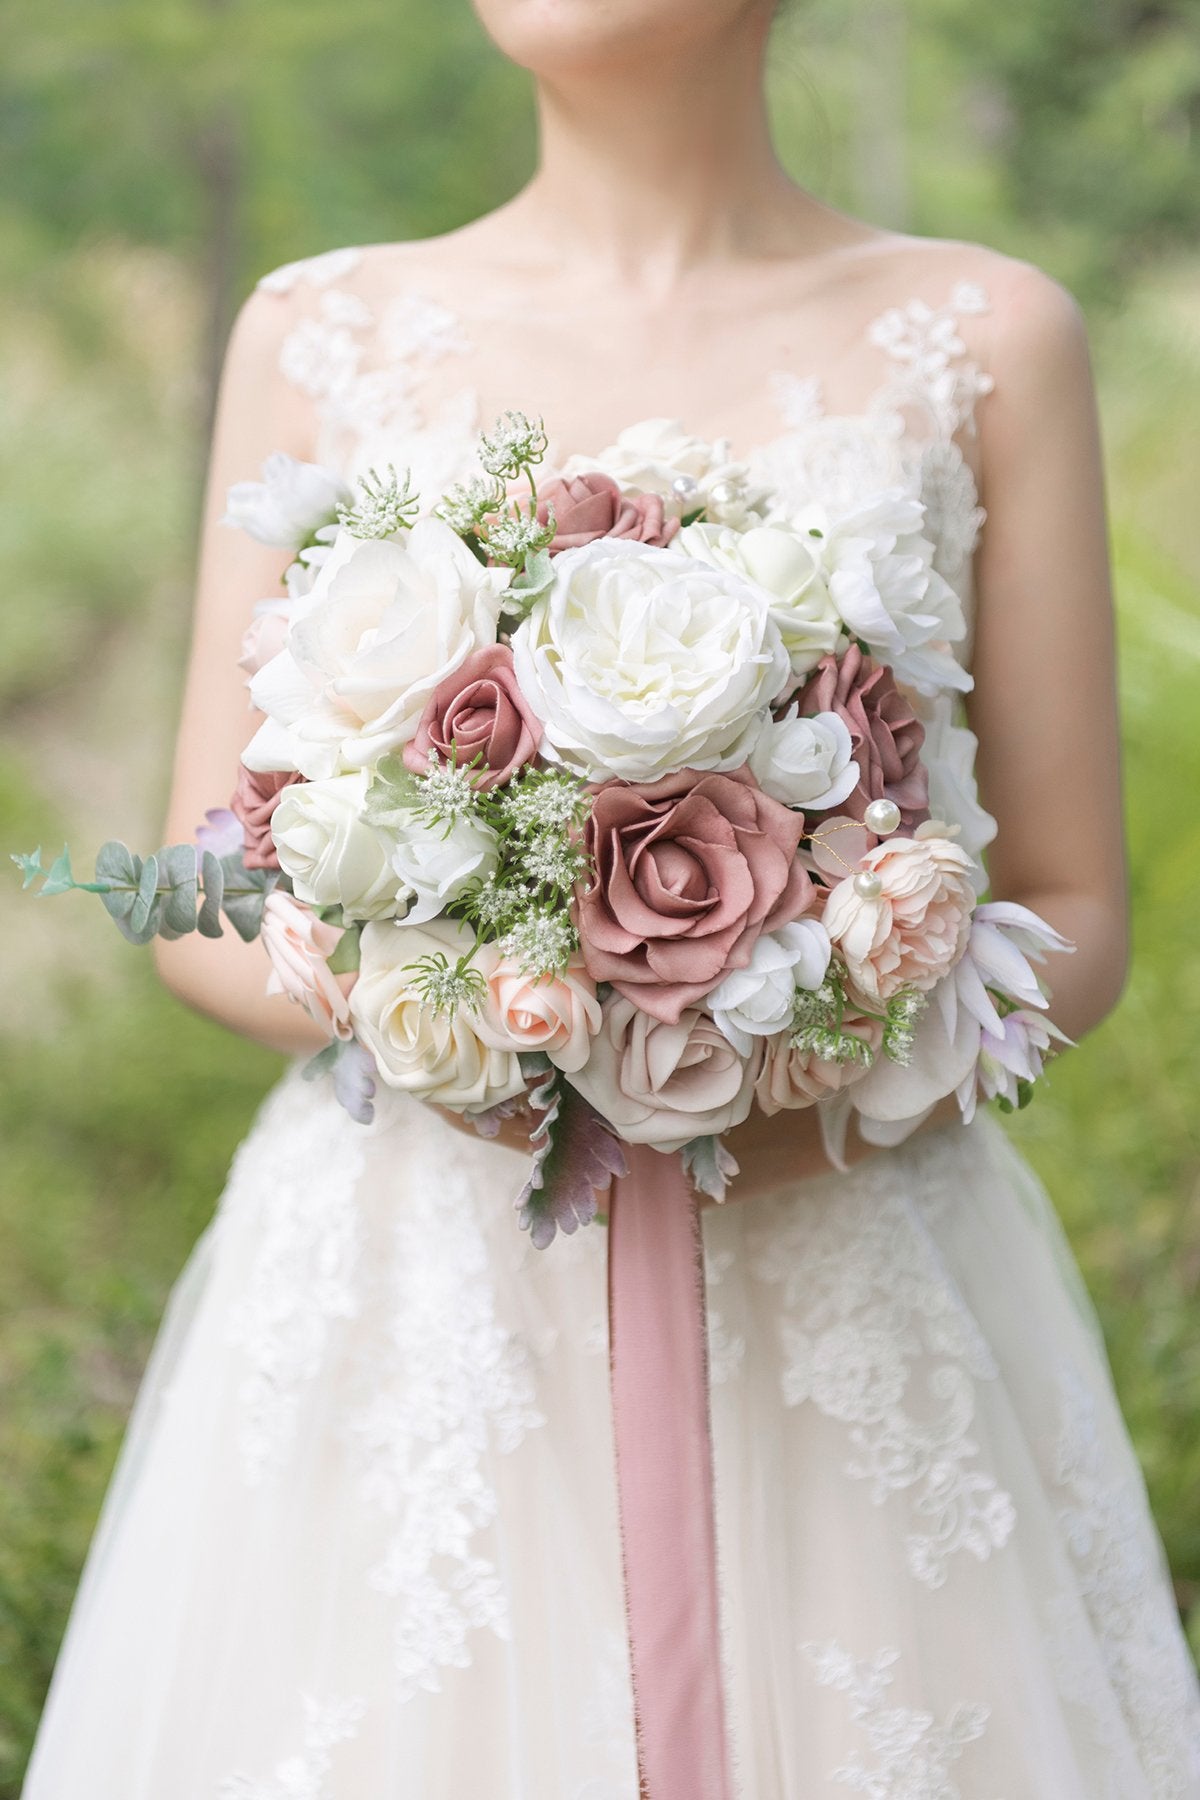 Dusty Rose & Cream Personal Flowers Pre-arranged Package | Bouquets + Wrist Corsages + Boutonnieres